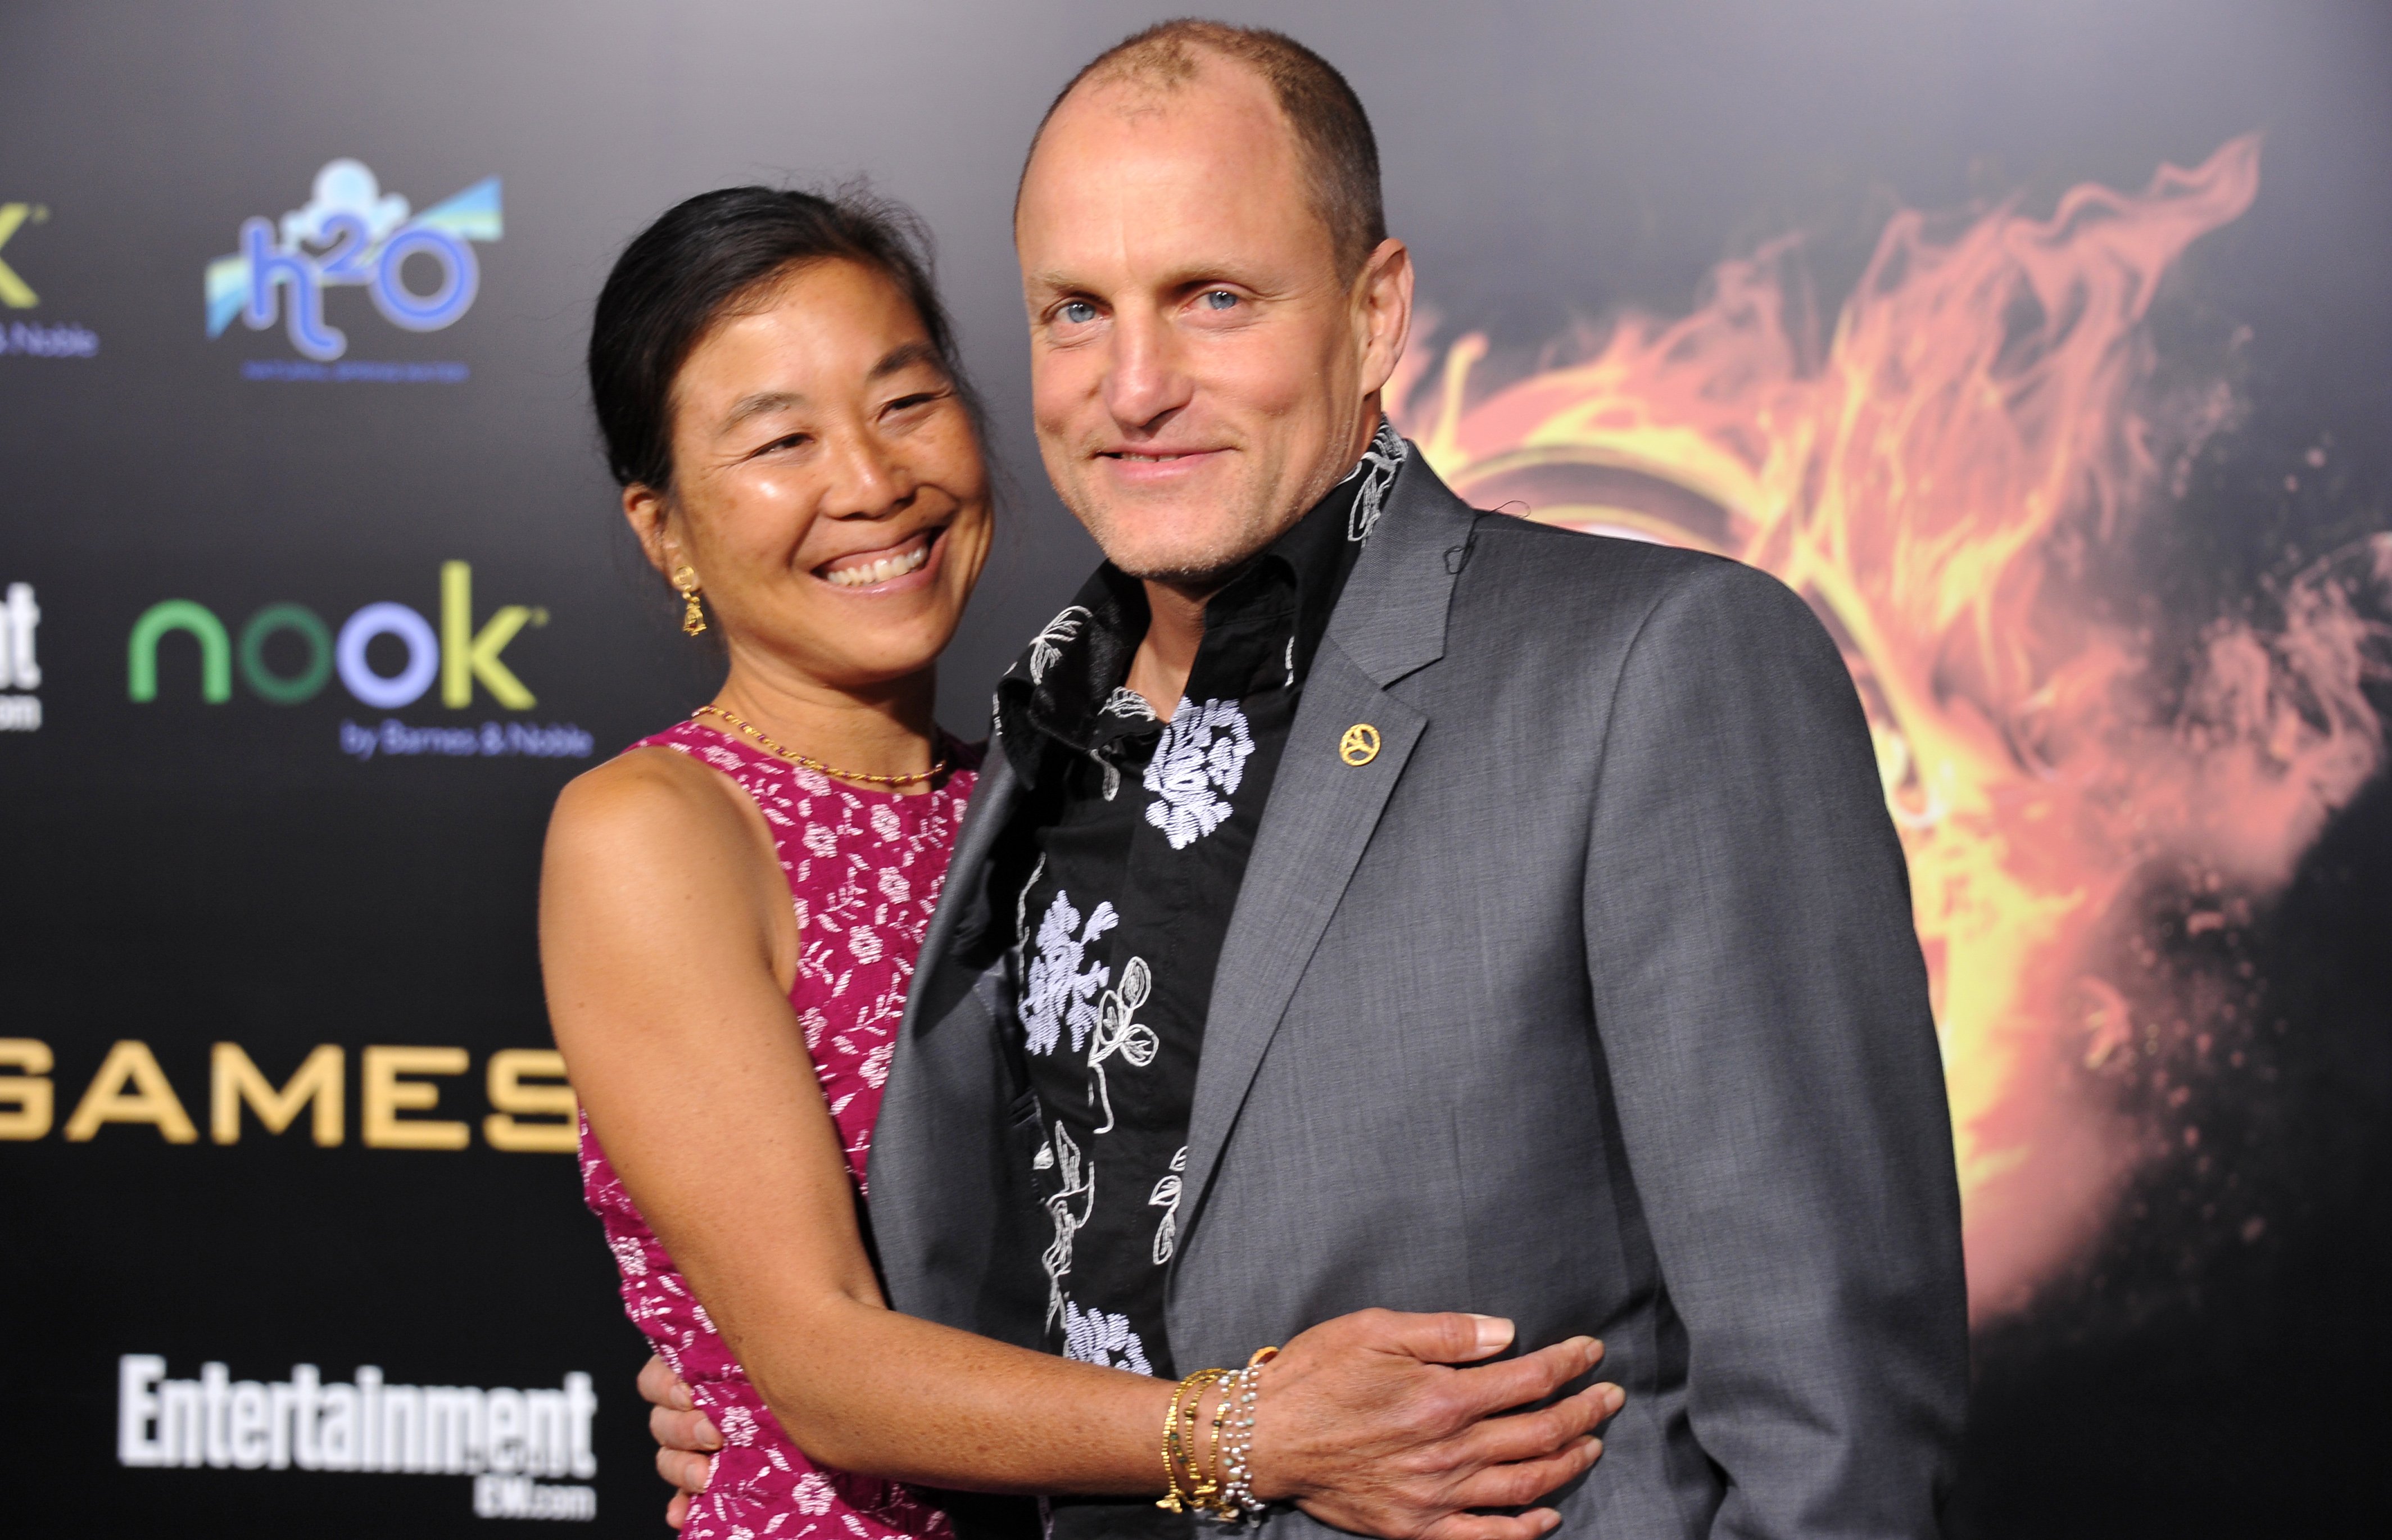 Laura Louie Didn't Leave Woody Harrelson Even after He Cheated On Her